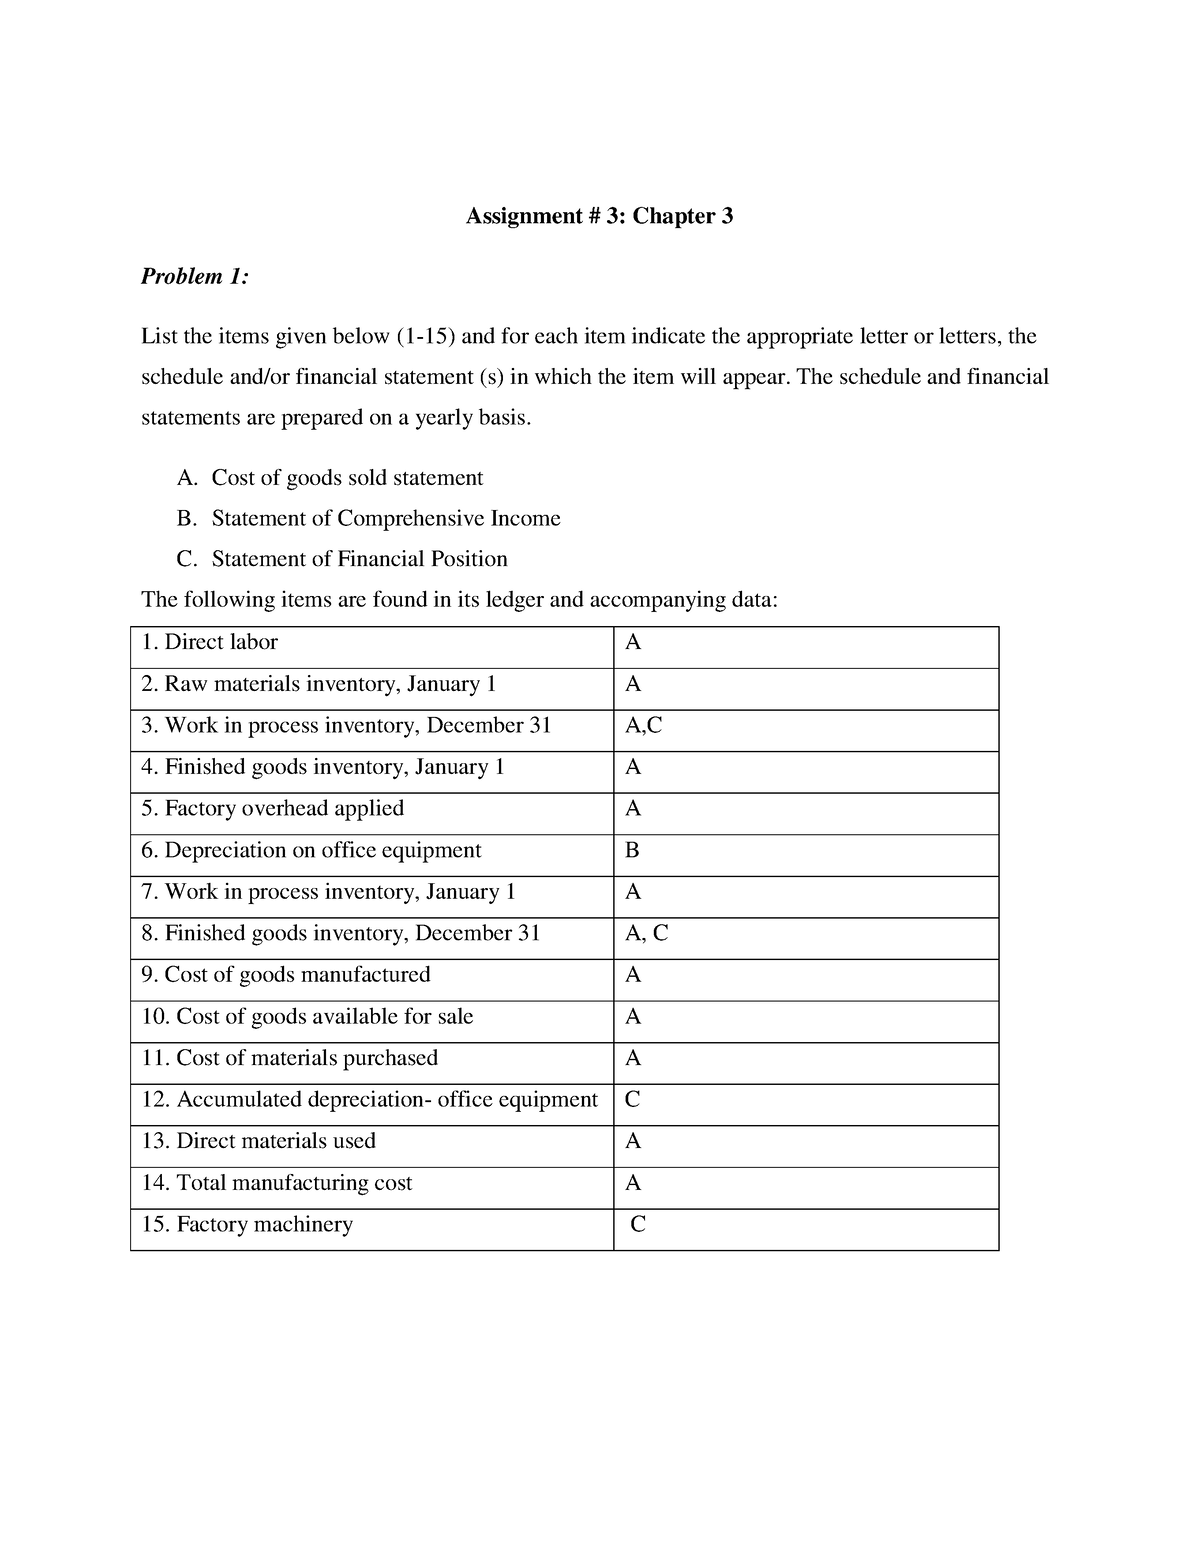 assignment chapter 3 post learning assessment